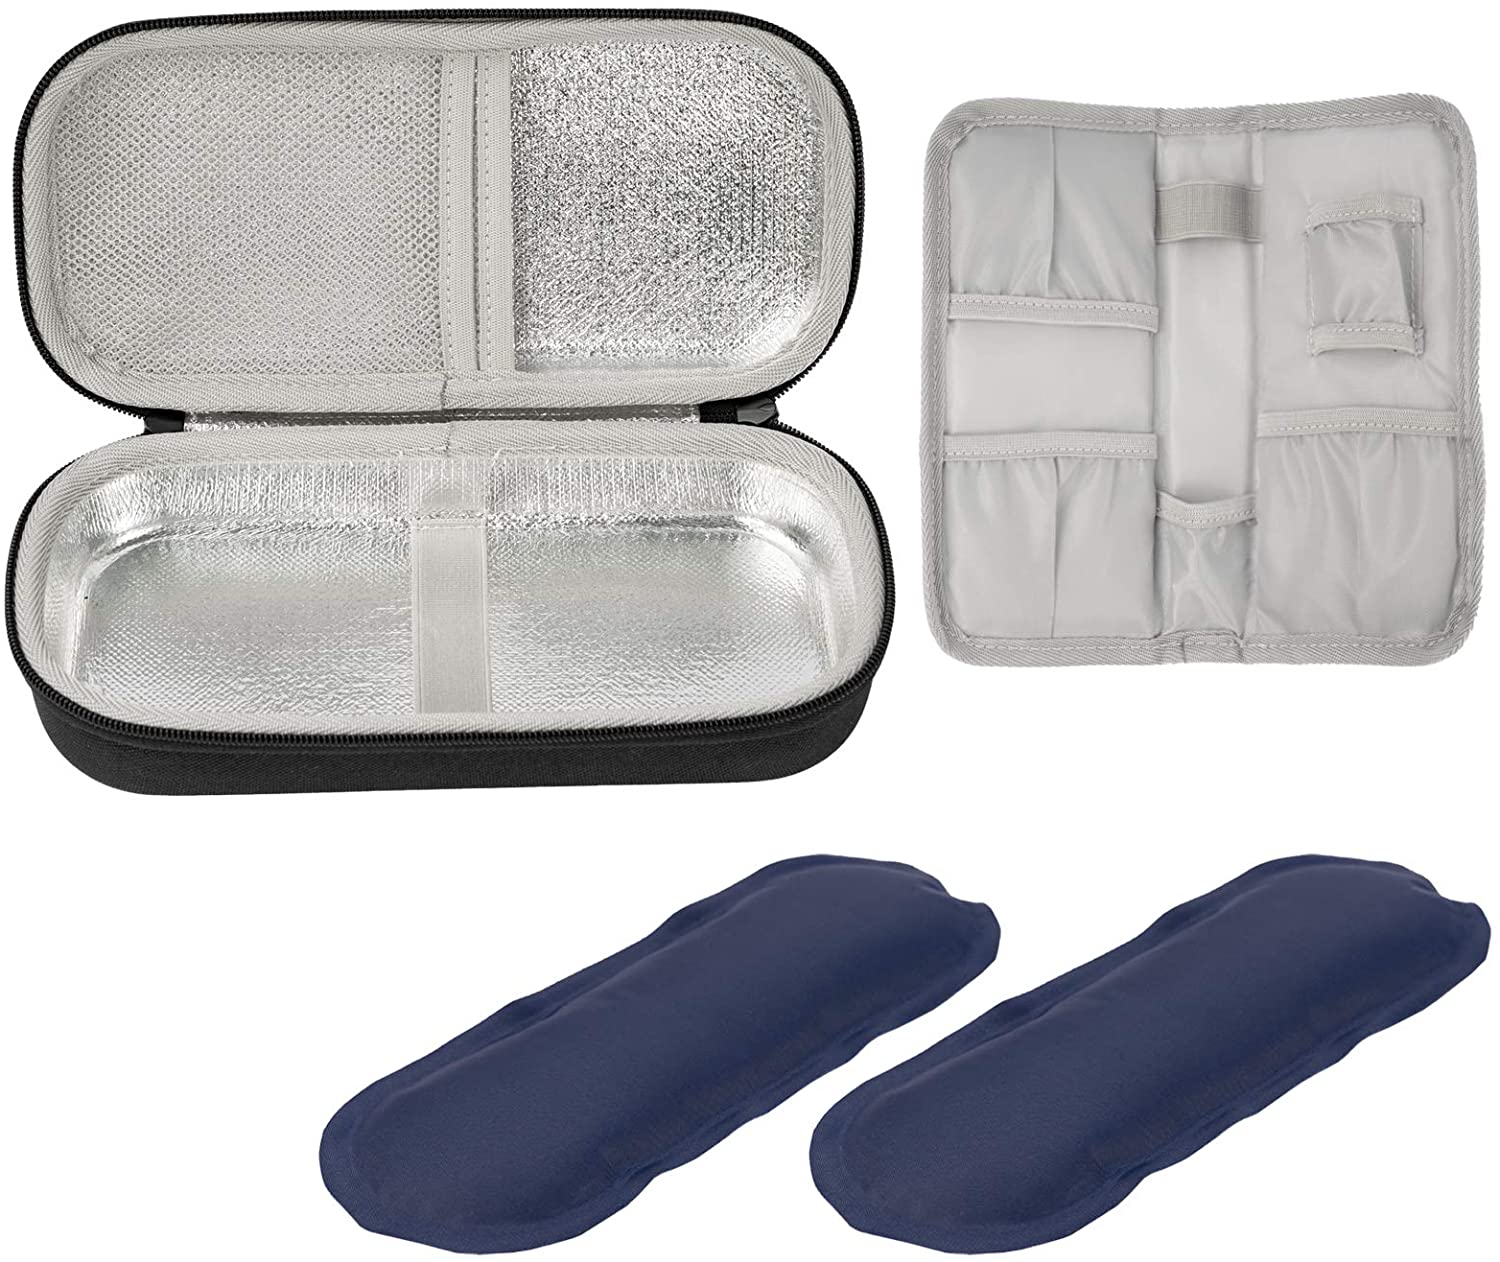 Insulin Cooler Travel Carrying Case | Procase